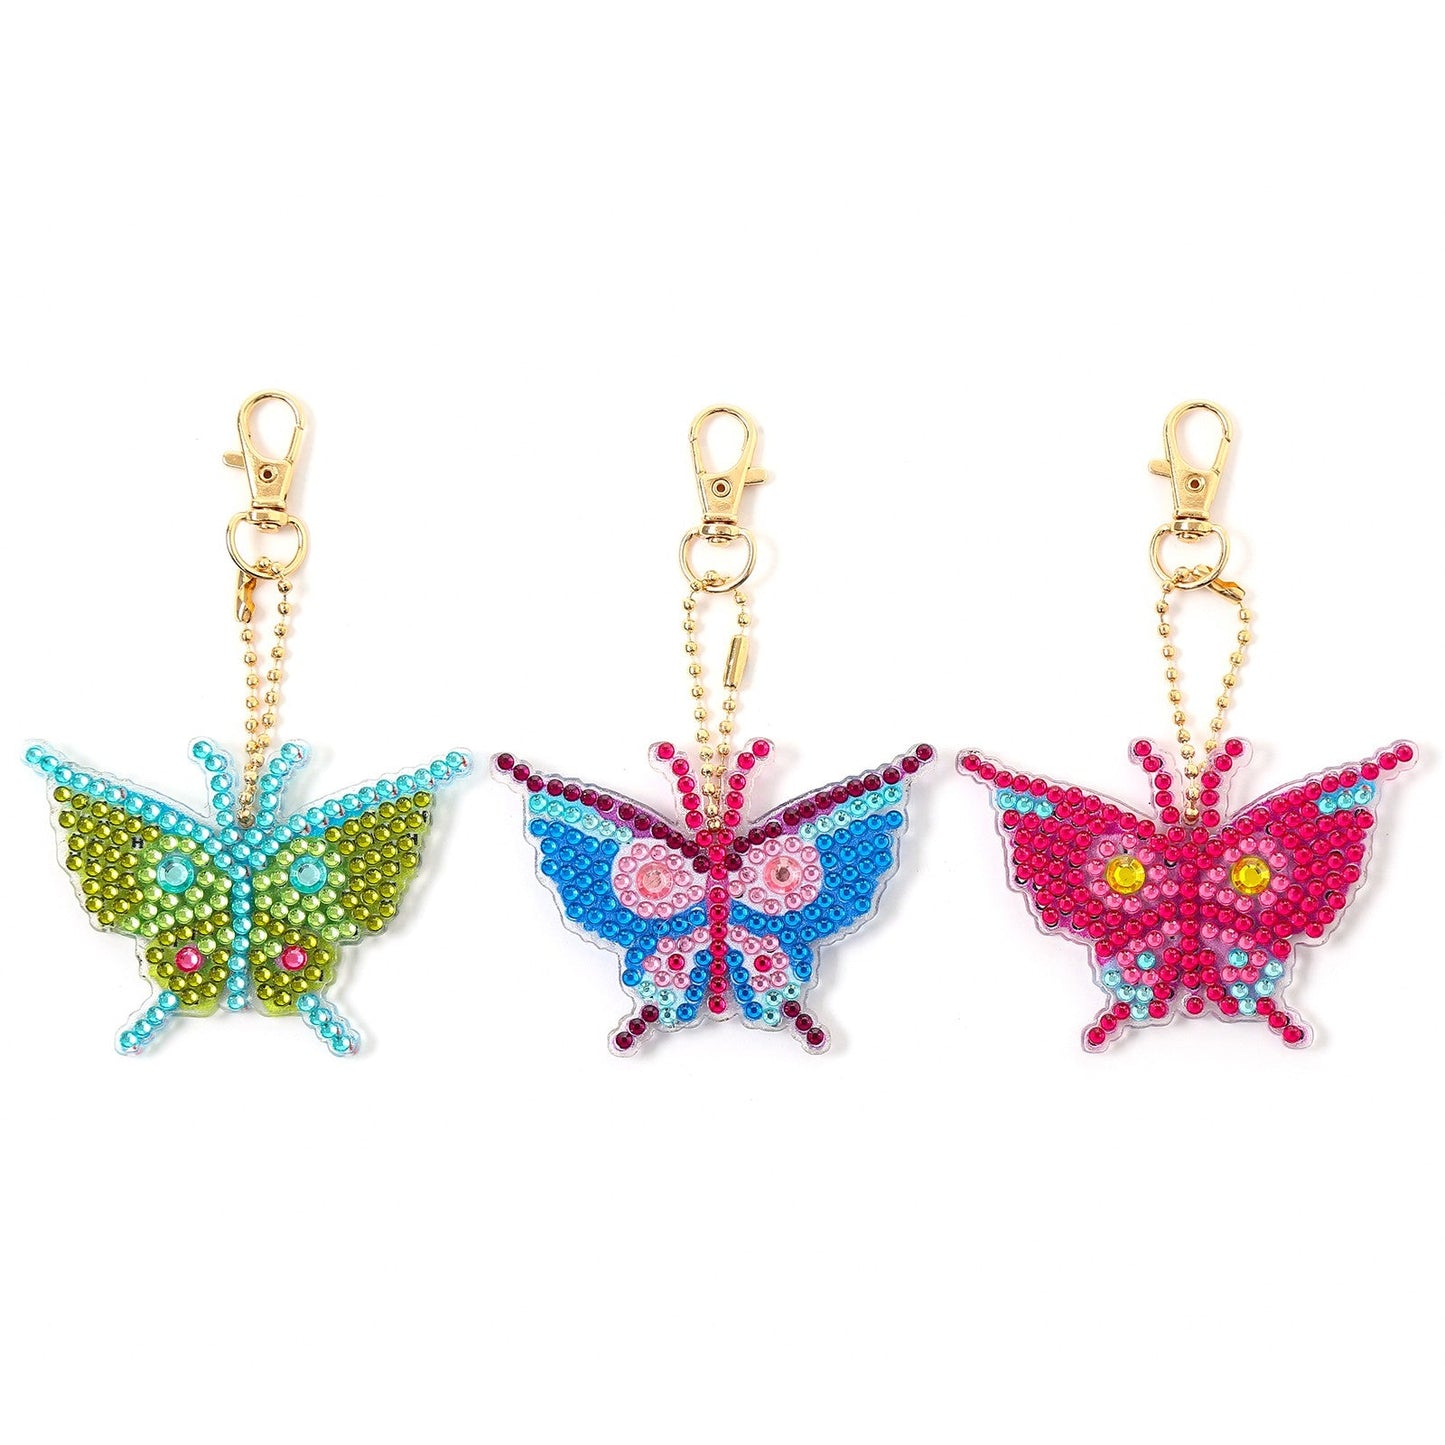 Blingbling's Keychain | Butterfly | Three Piece Set